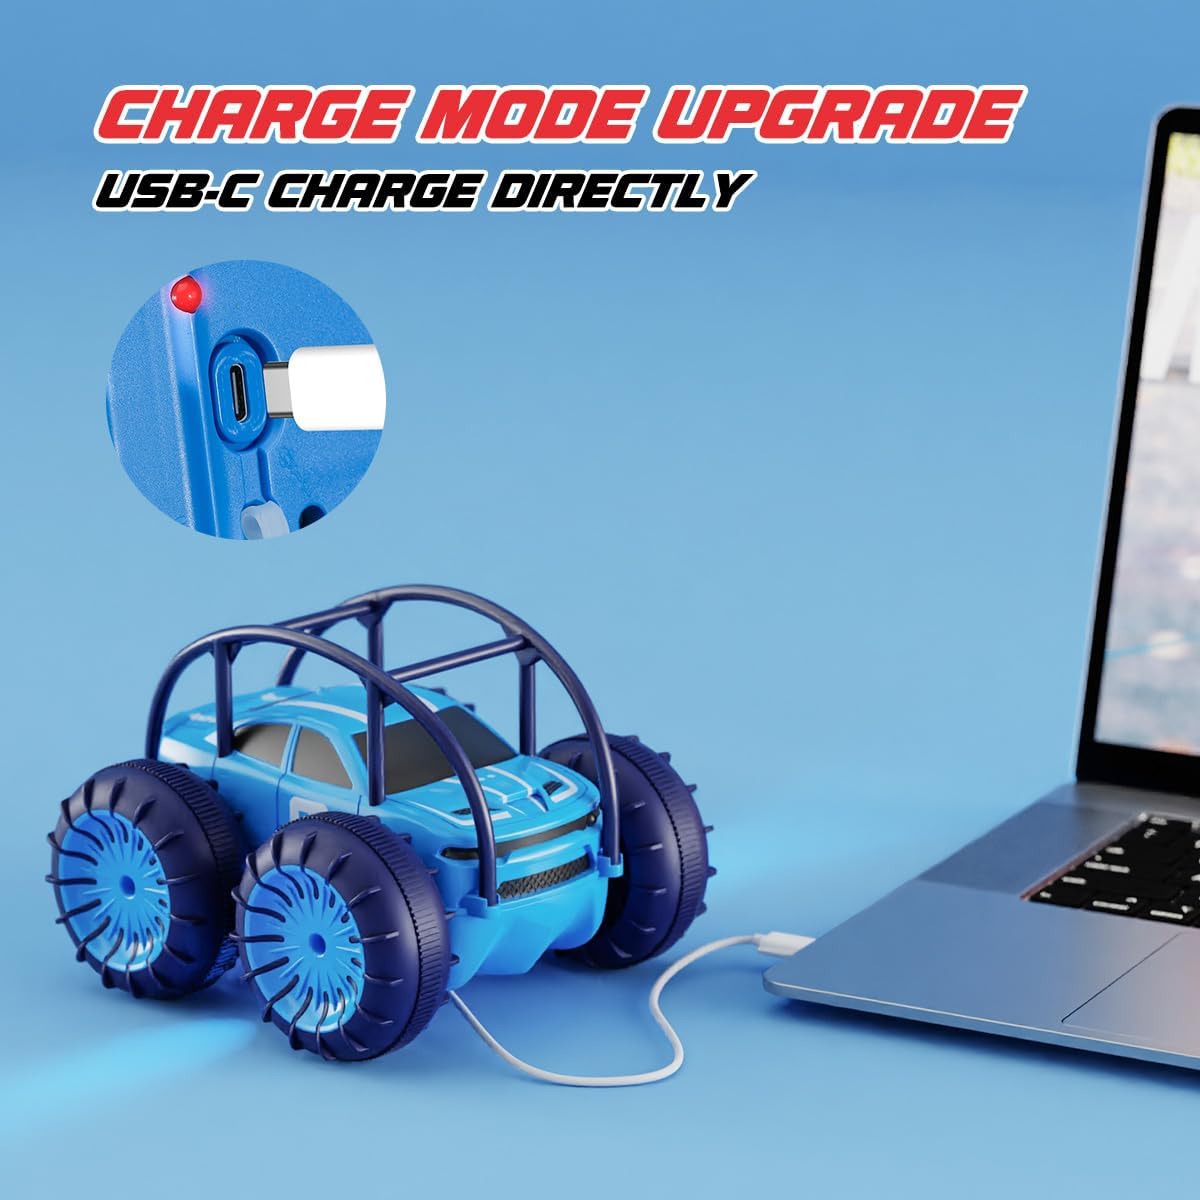 Amphibious Remote Control Car, Rechargeable Direct Charging RC Cars 360° Flip Waterproof RC Stunt Car 2.4Ghz 15KM/H 4WD - Cykapu